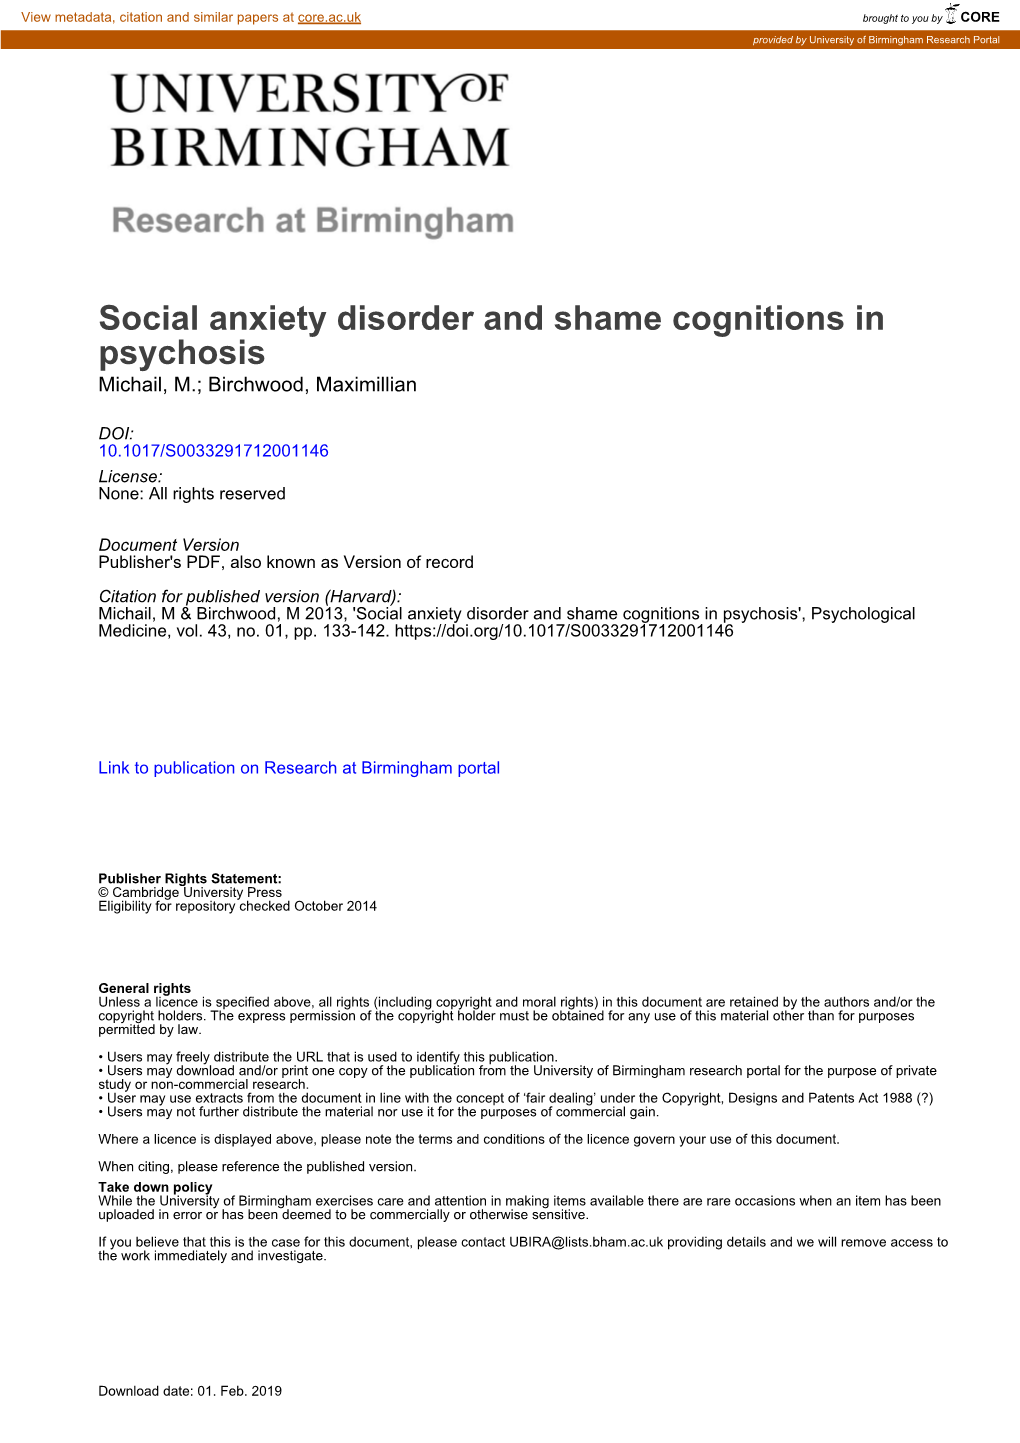 Social Anxiety Disorder and Shame Cognitions in Psychosis Michail, M.; Birchwood, Maximillian